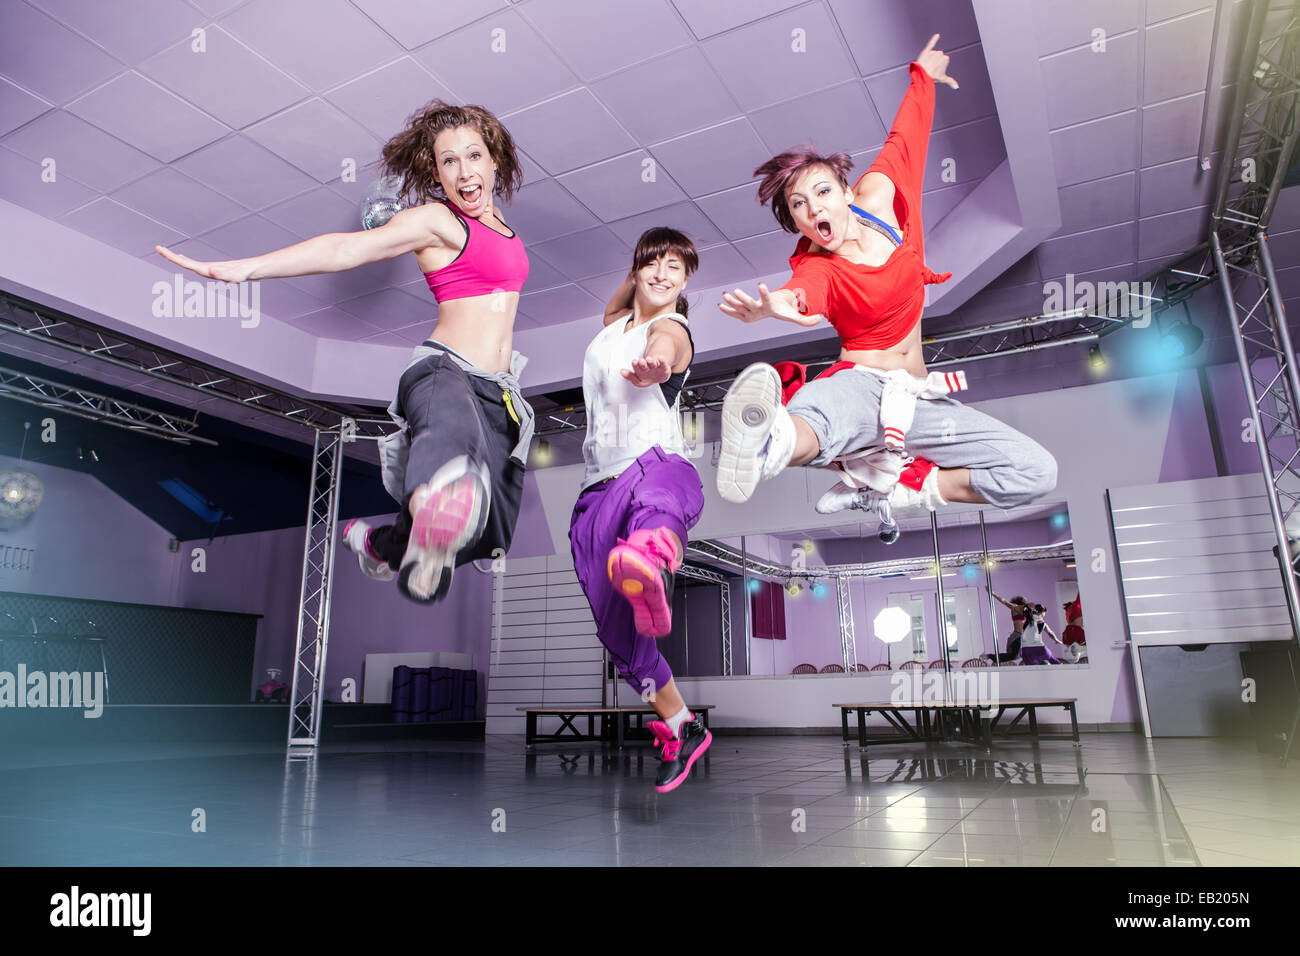 group of  women in sport dress jumping at fitness dance exercise or aerobics Stock Photo